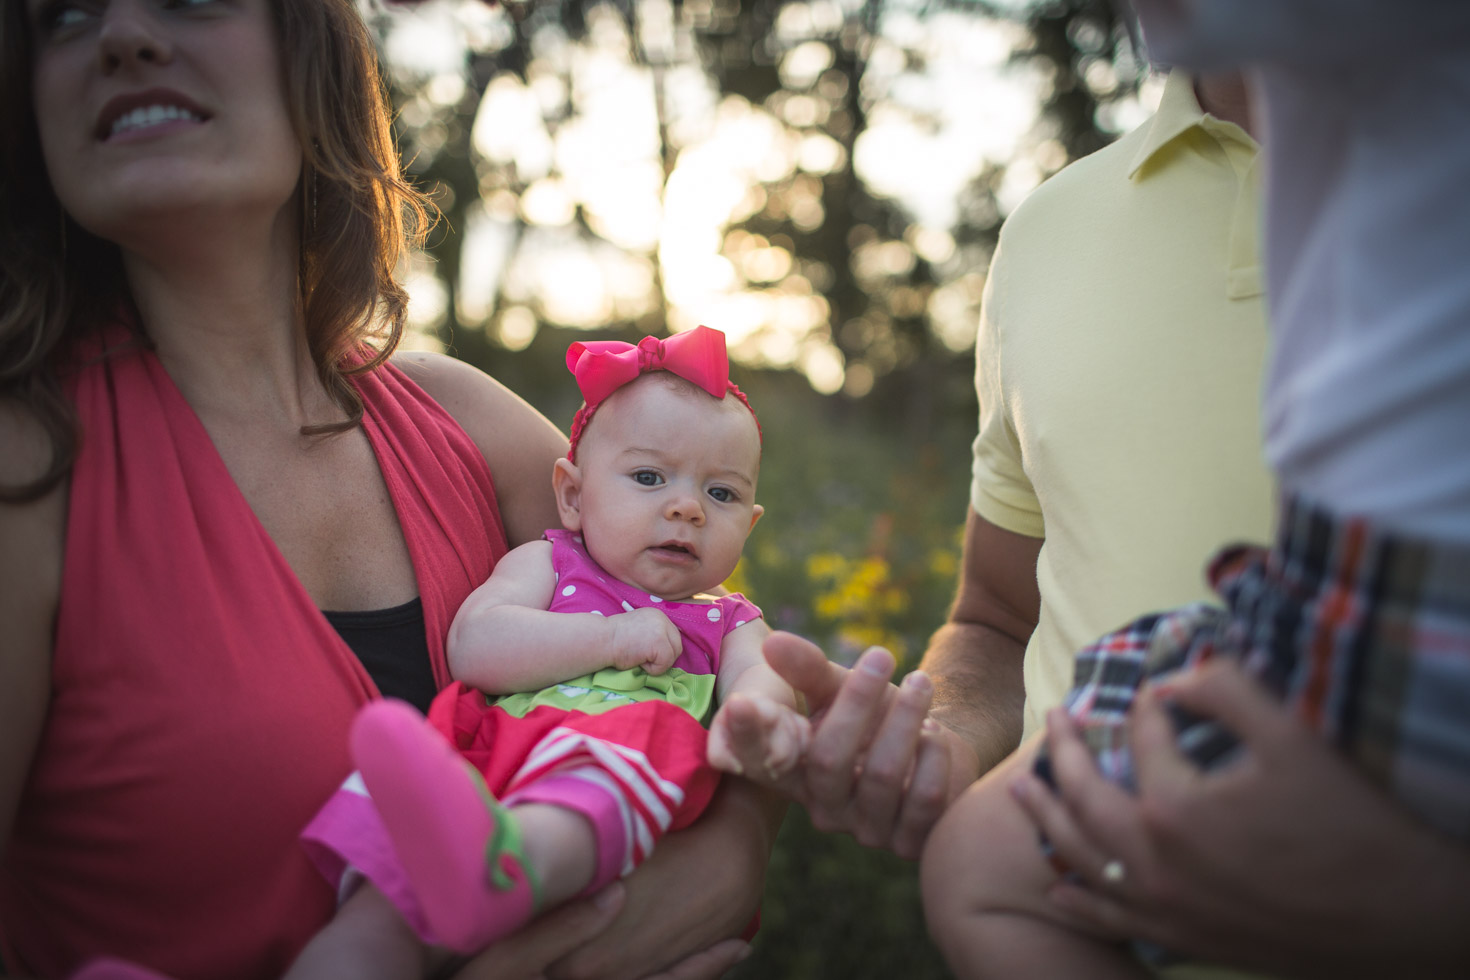 Family image with focus on infant looking at camera while being held in mothers arms 